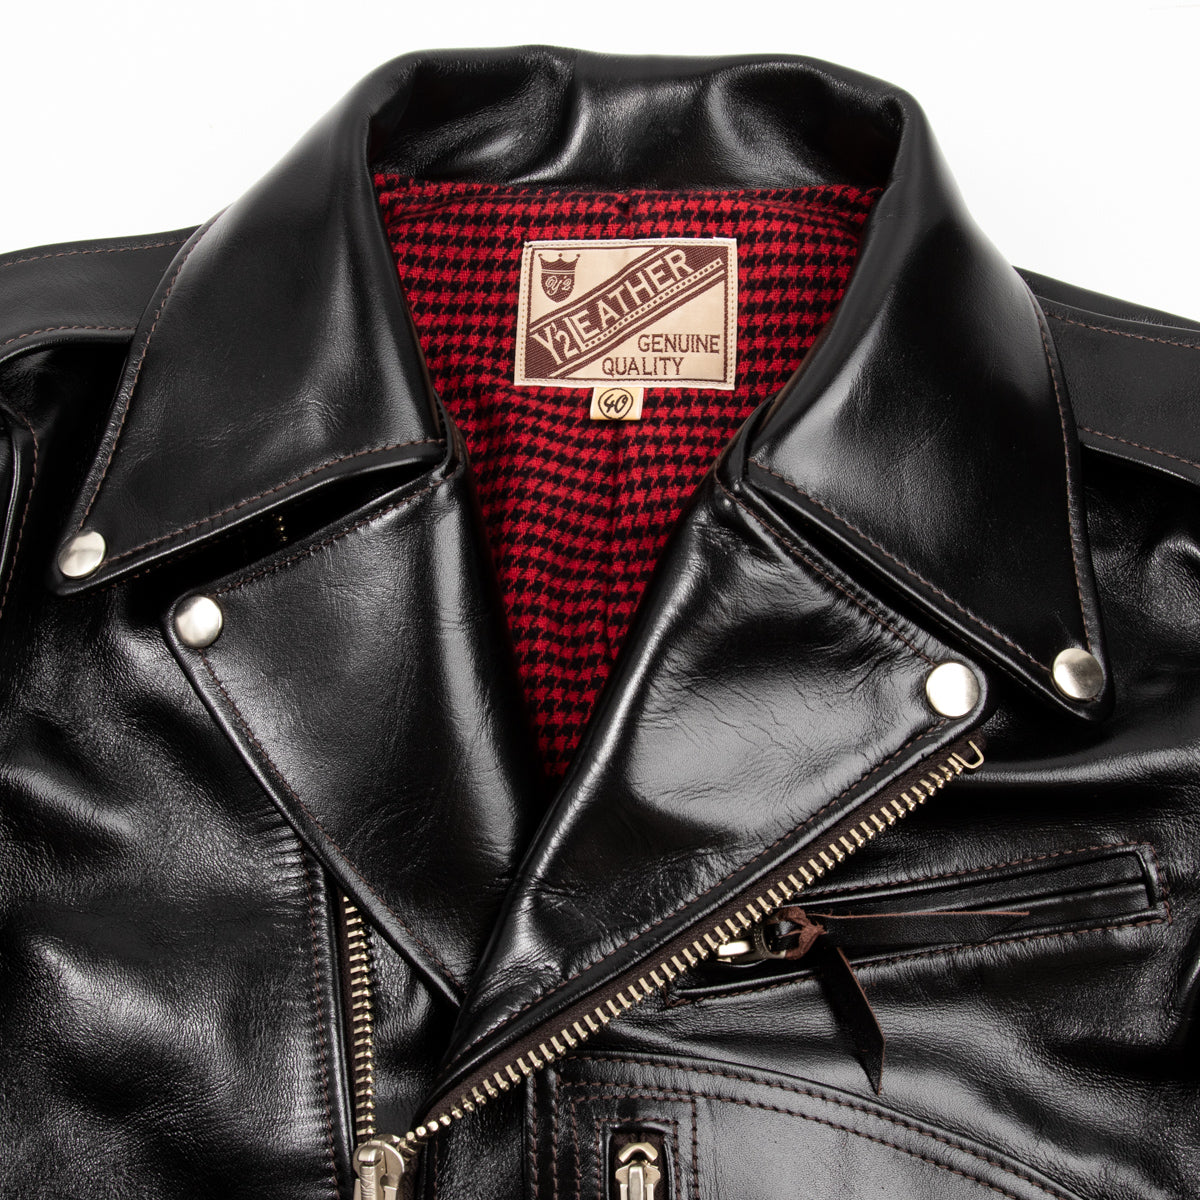 Vintage Black And Red Leather Biker Jacket With Zip Up Cuffs